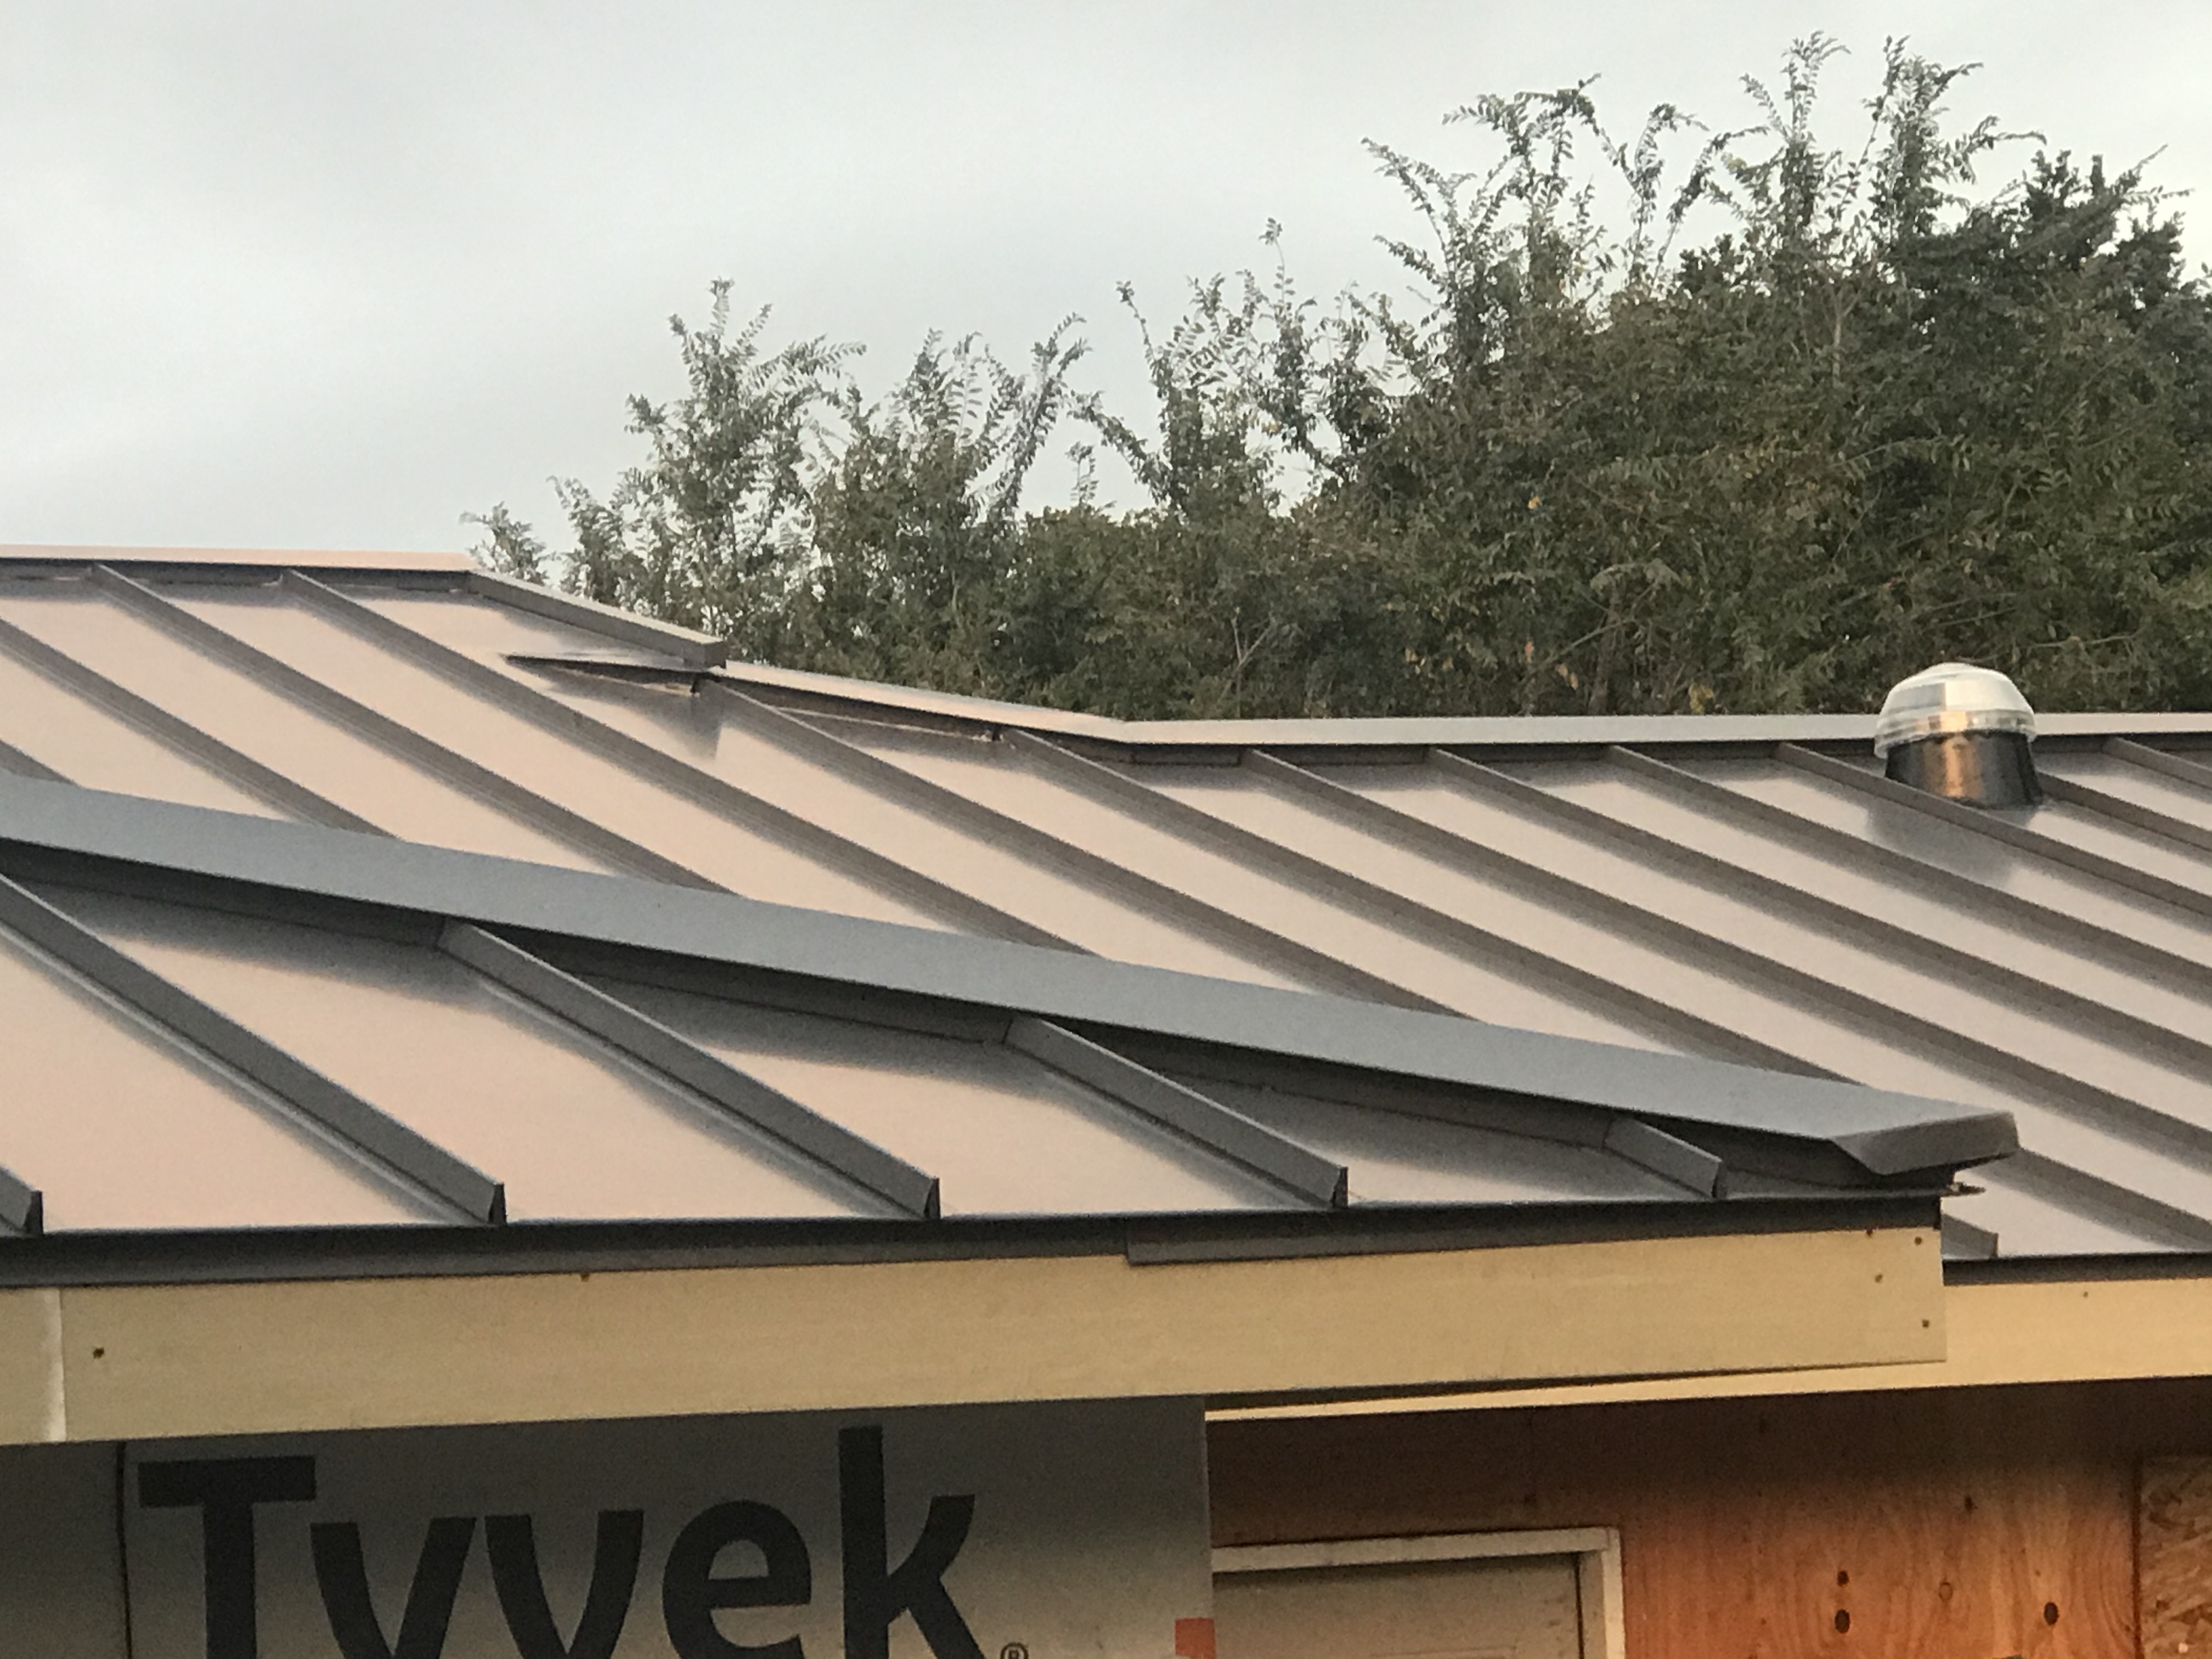 Any suggestions to fix this "We just had a metal standing seam roof installed during